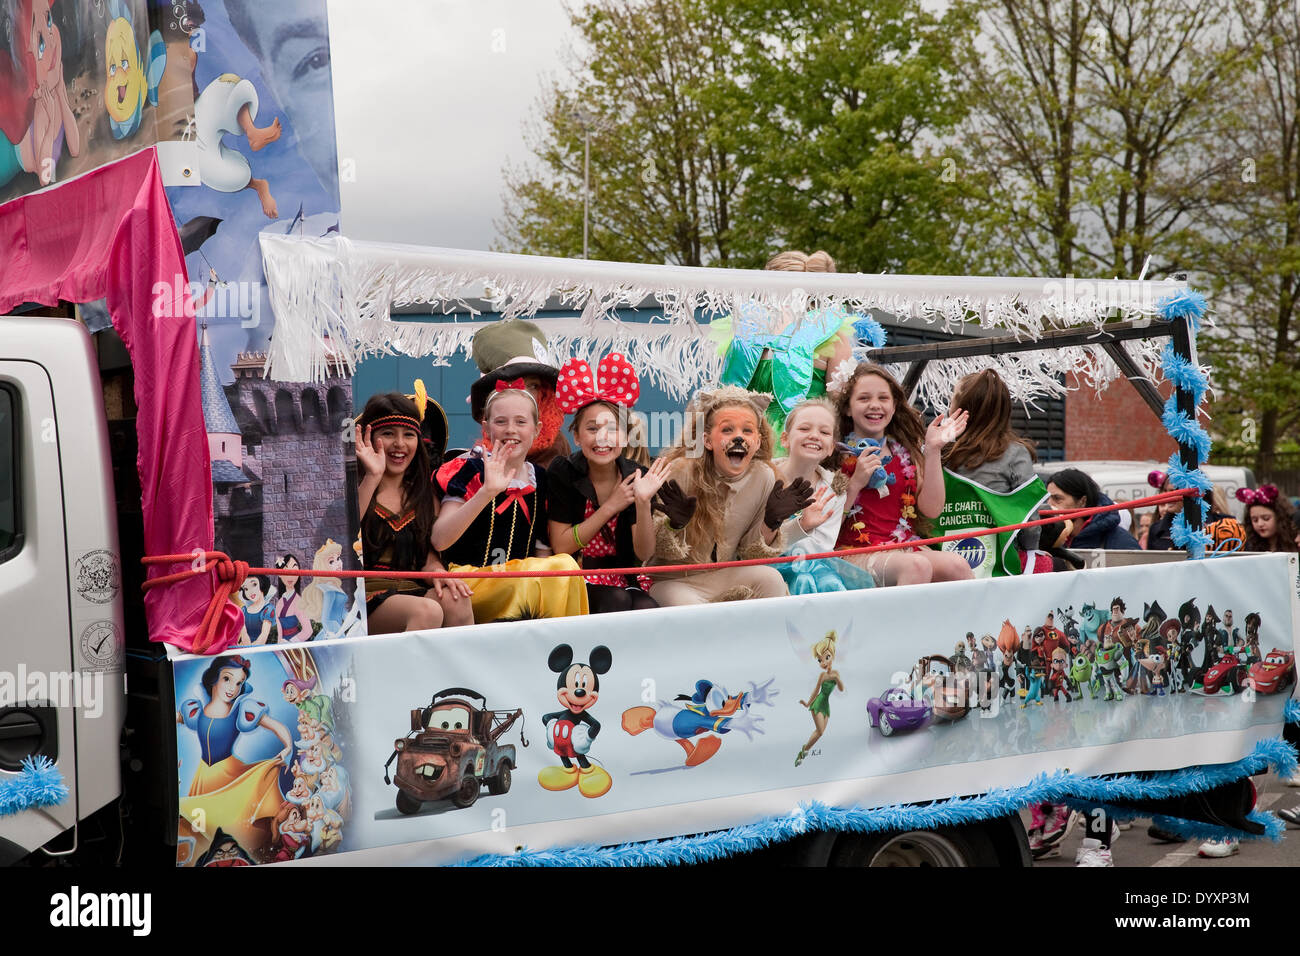 Biggin Hill,UK,27th April 2014,Positive Path walkers on a float dressed as Disney characters who are raising money for the the Chartwell Cancer Trus Credit: Keith Larby/Alamy Live News Stock Photo